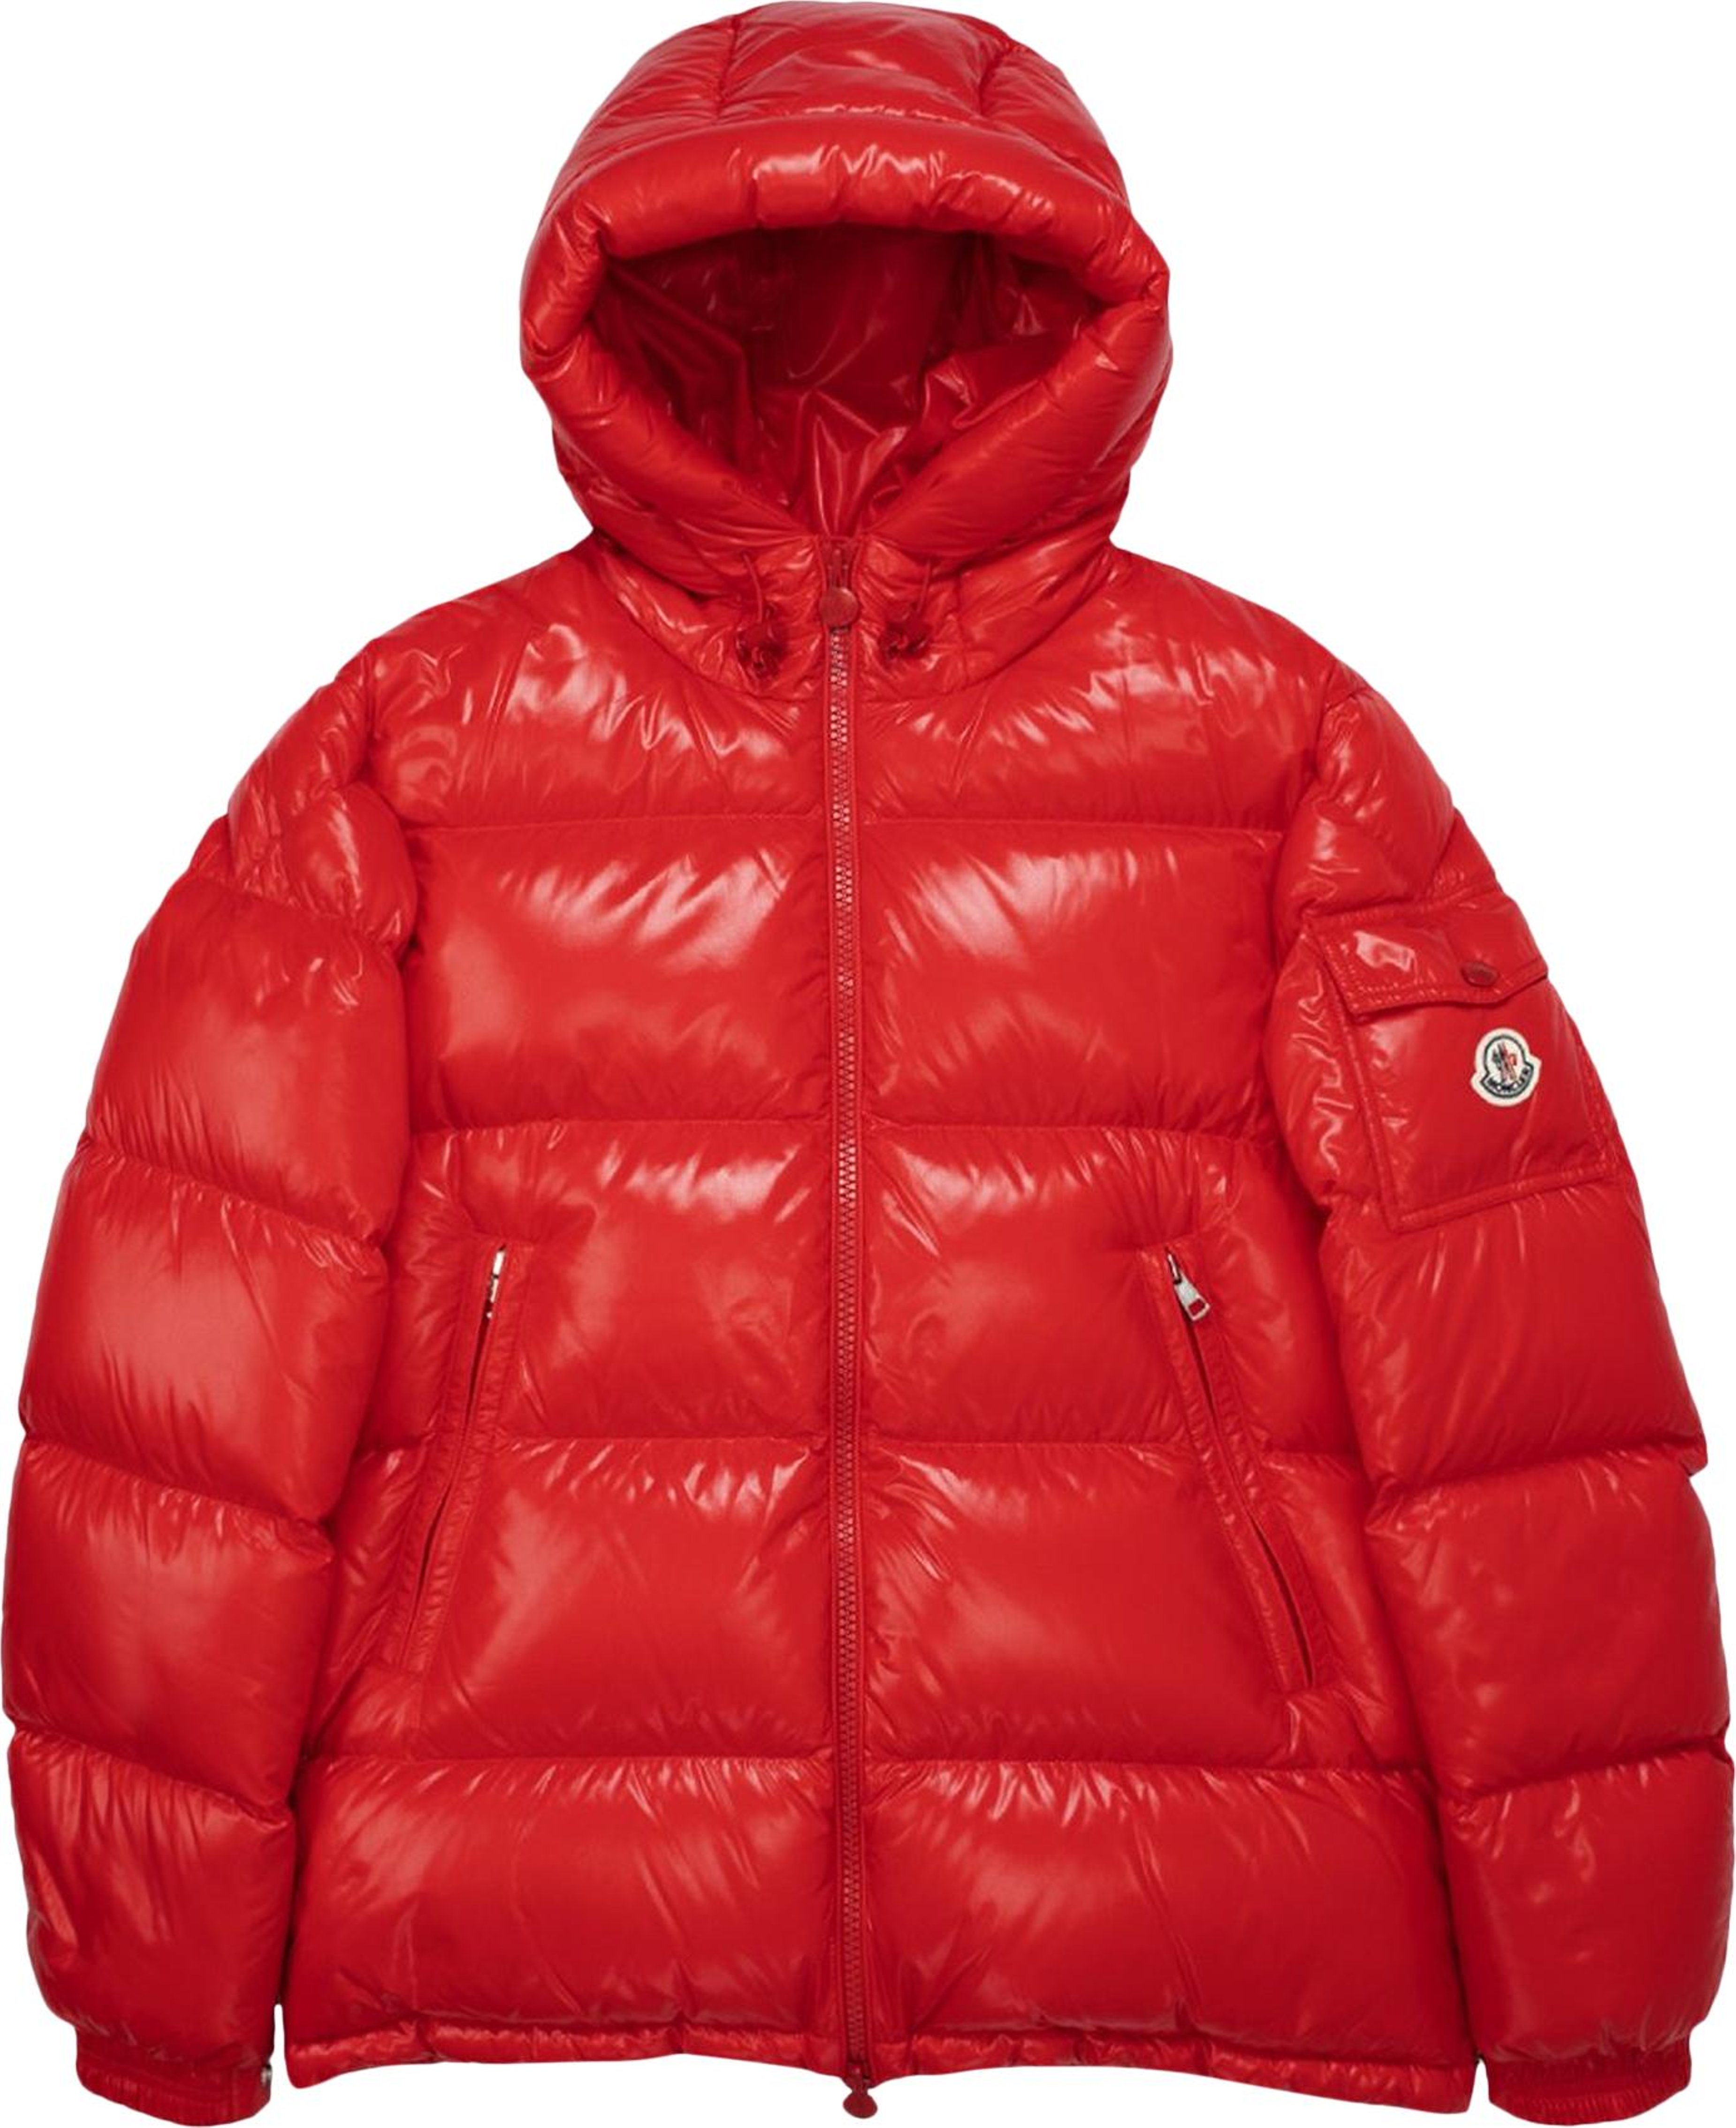 Buy Moncler Ecrins Shiny Puffer Jacket 'Red' - 1A001 68 68950 455 | GOAT